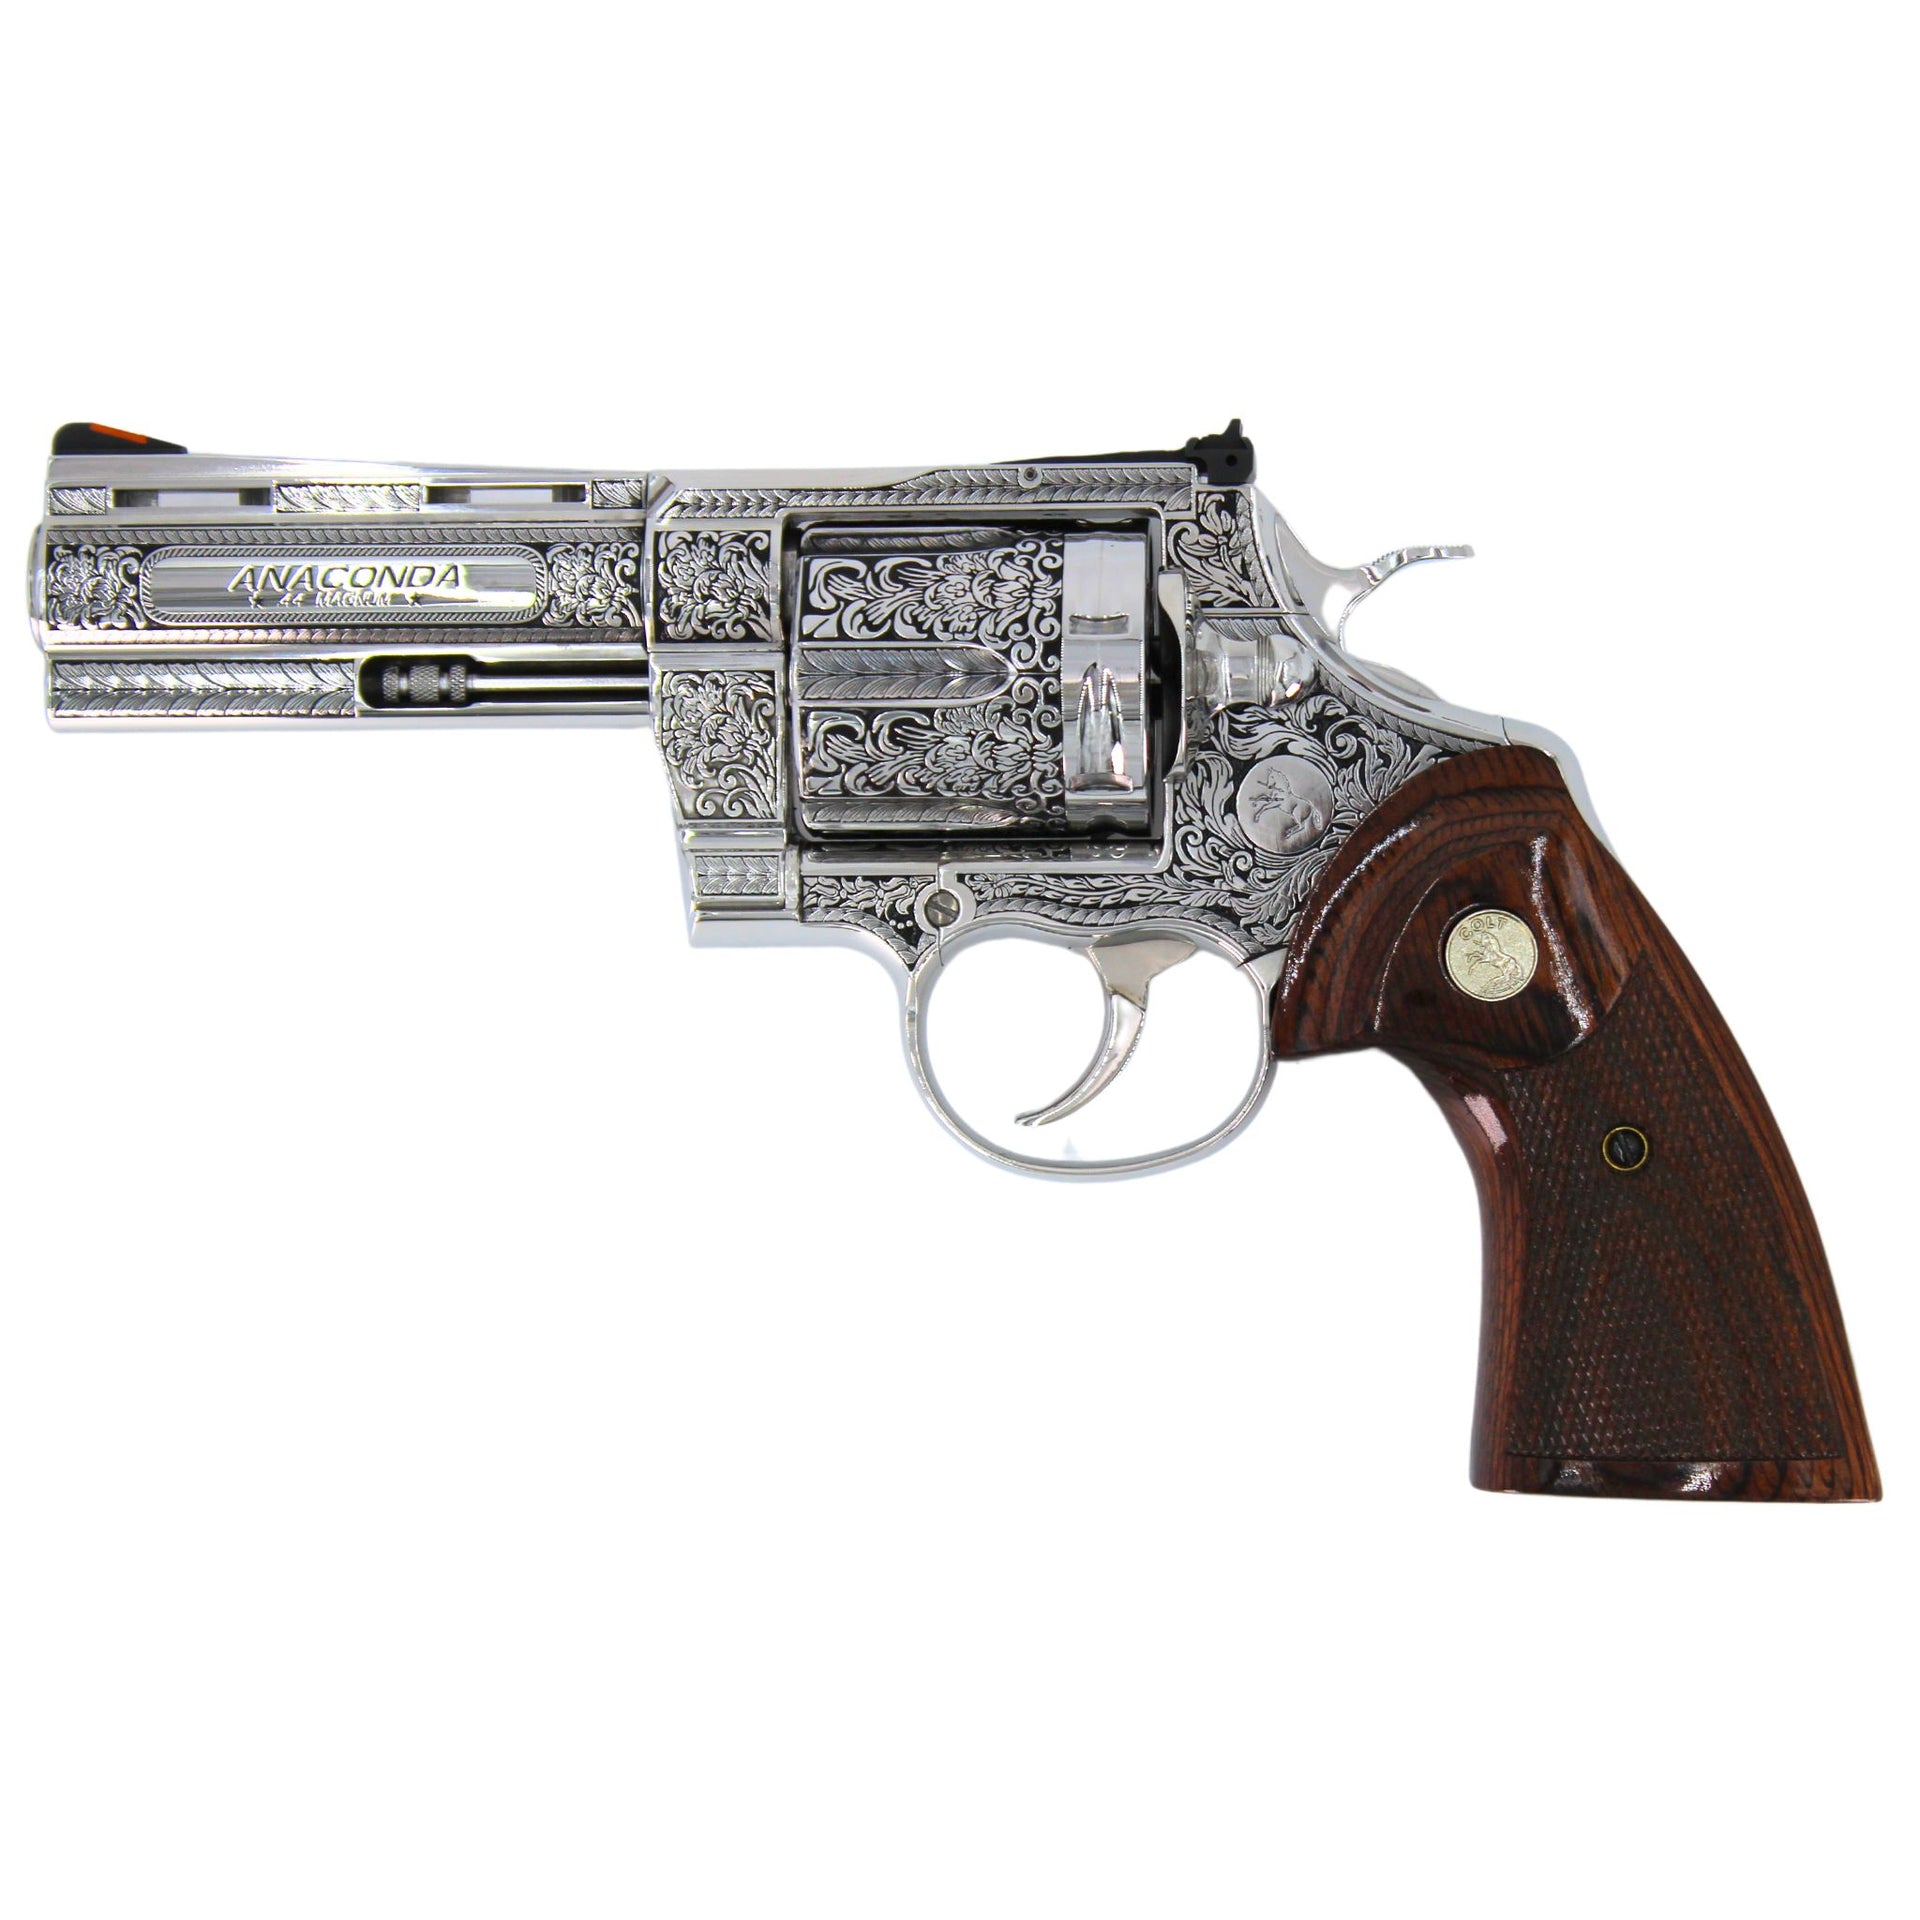 Colt Anaconda 4", .44 Magnum, Engraved High Polished Stainless Steel with Custom Gloss Varnish Wood Grips